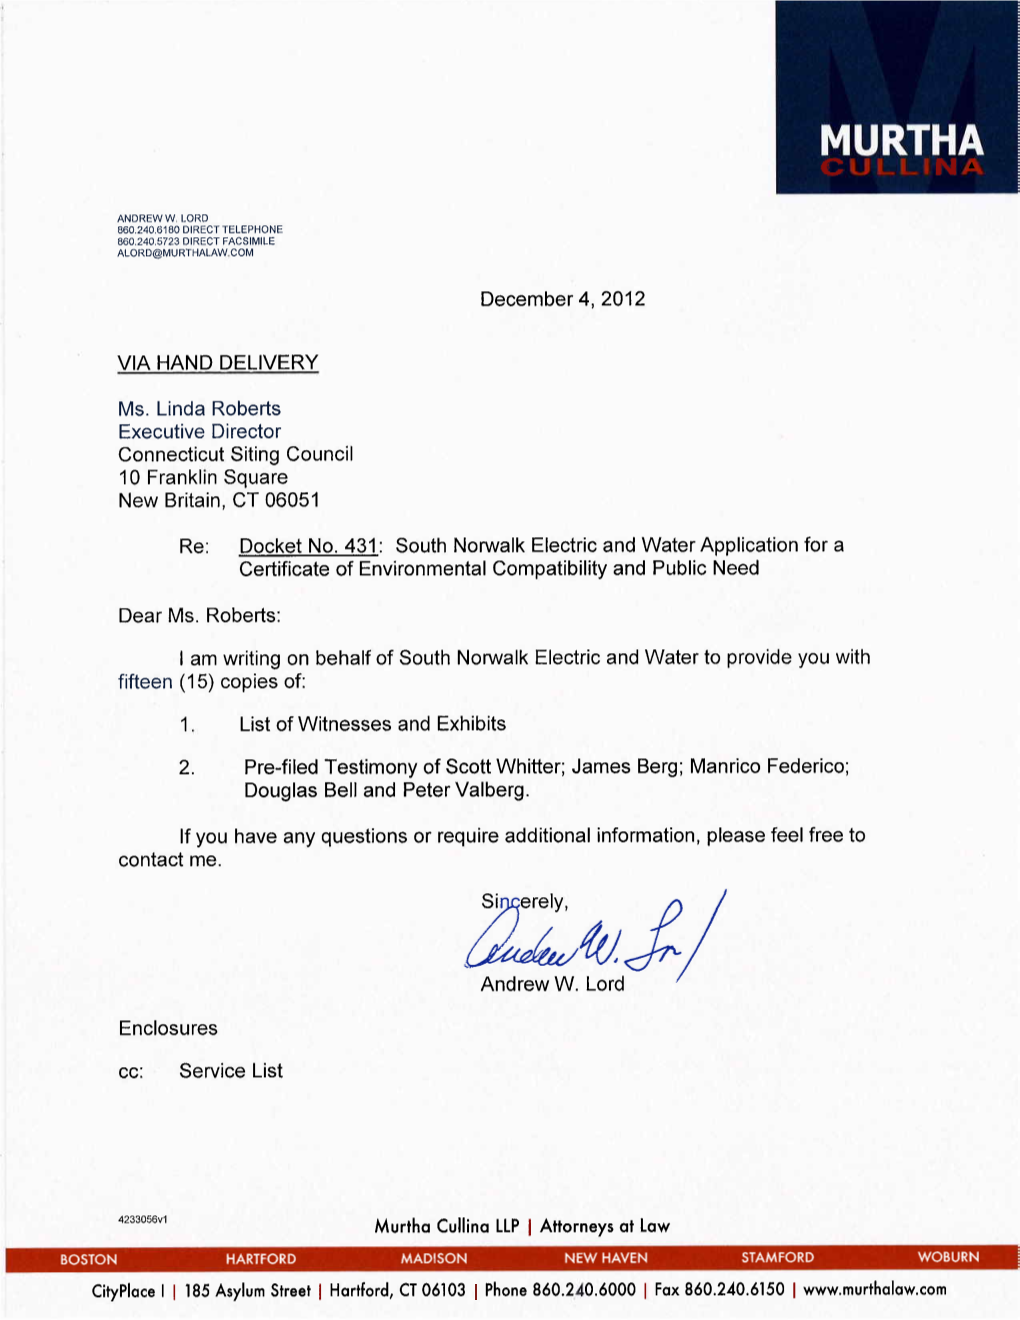 SNEW Pre-Filed Submission, Dated December 4, 2012